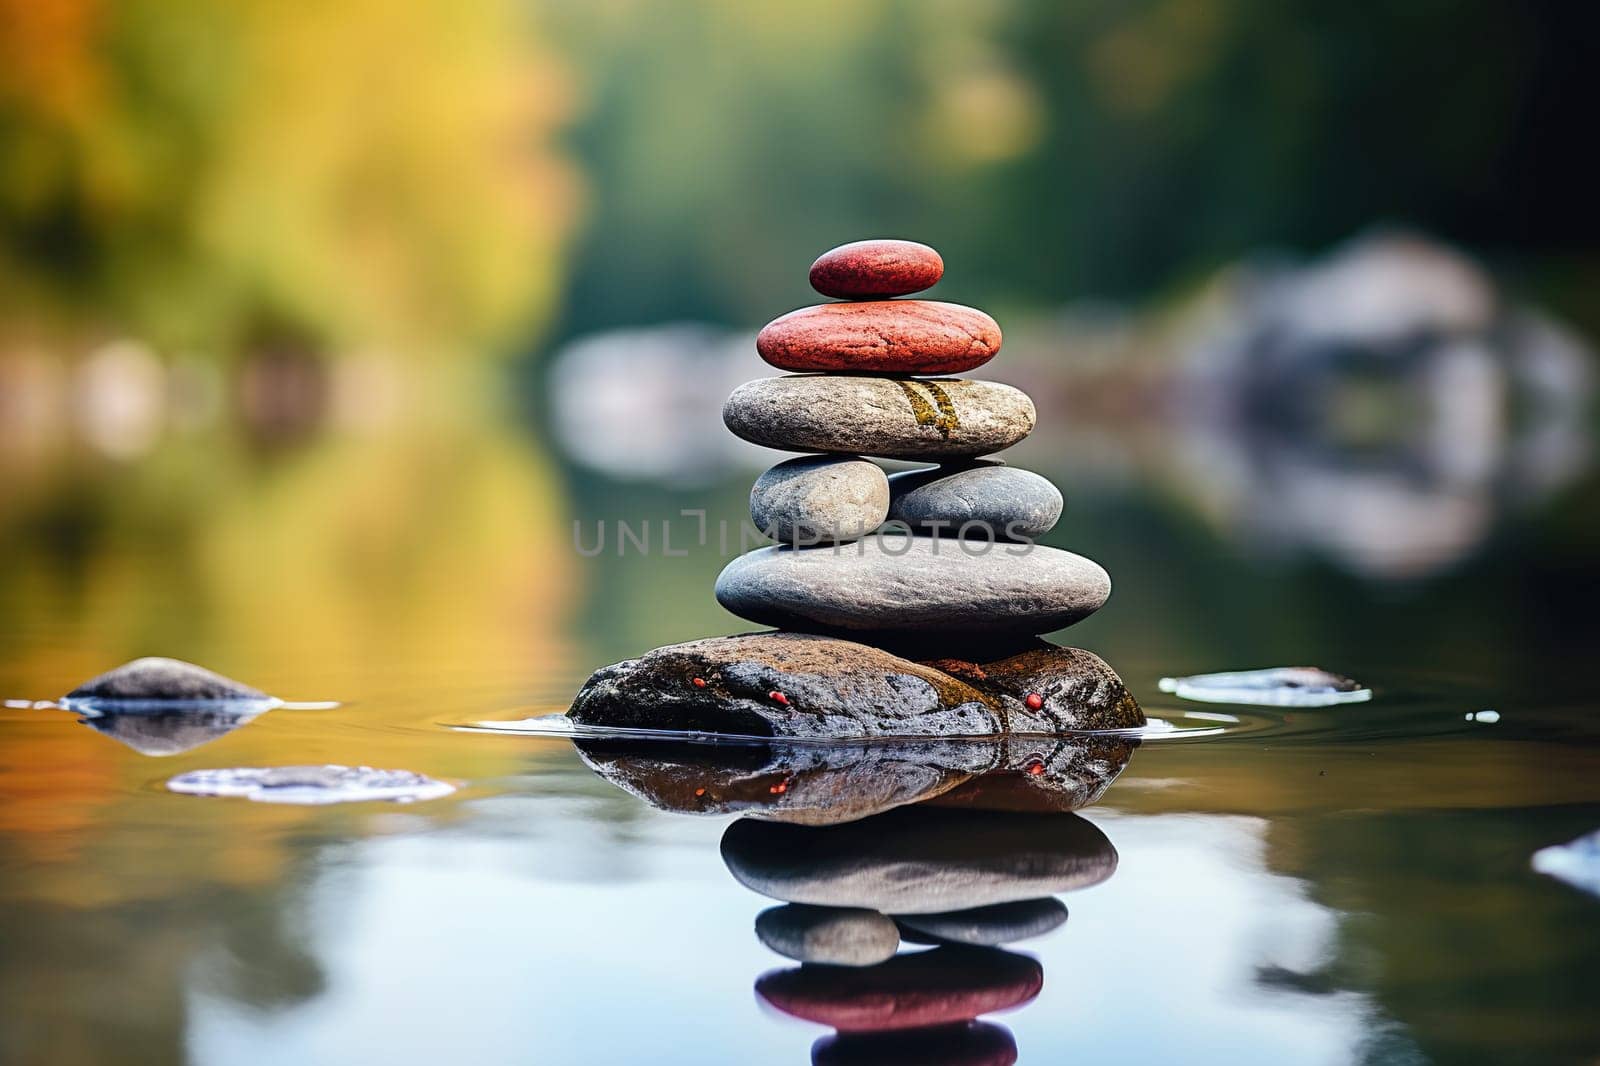 Smooth oval stones stacked on the water, blurred natural background.